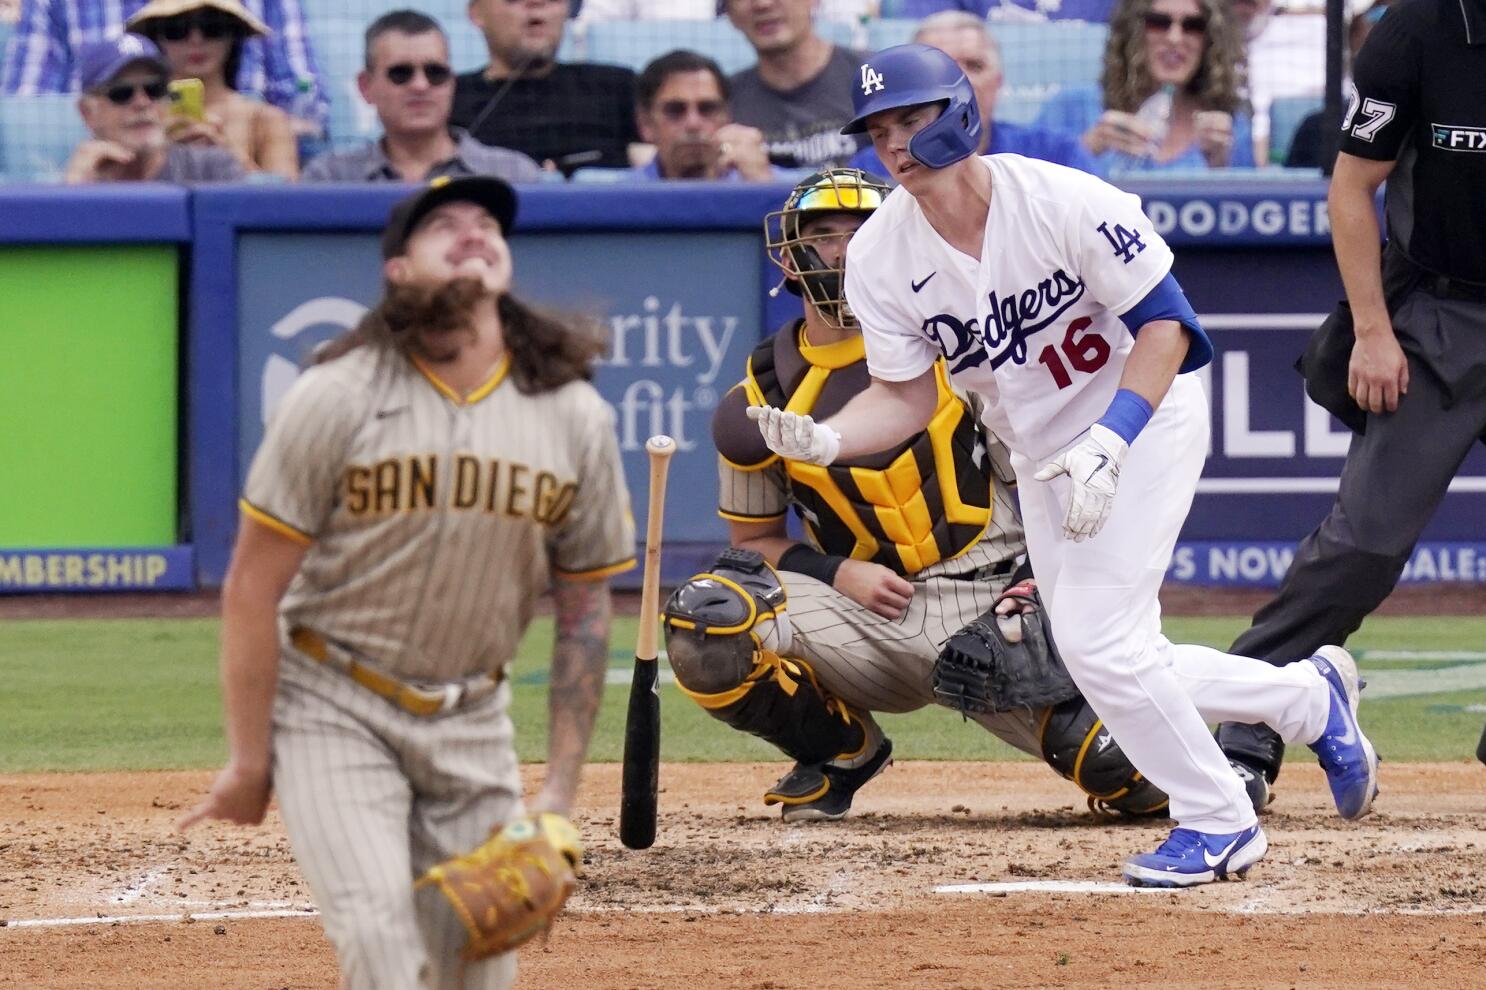 Padres unable to overcome Dodgers in finale